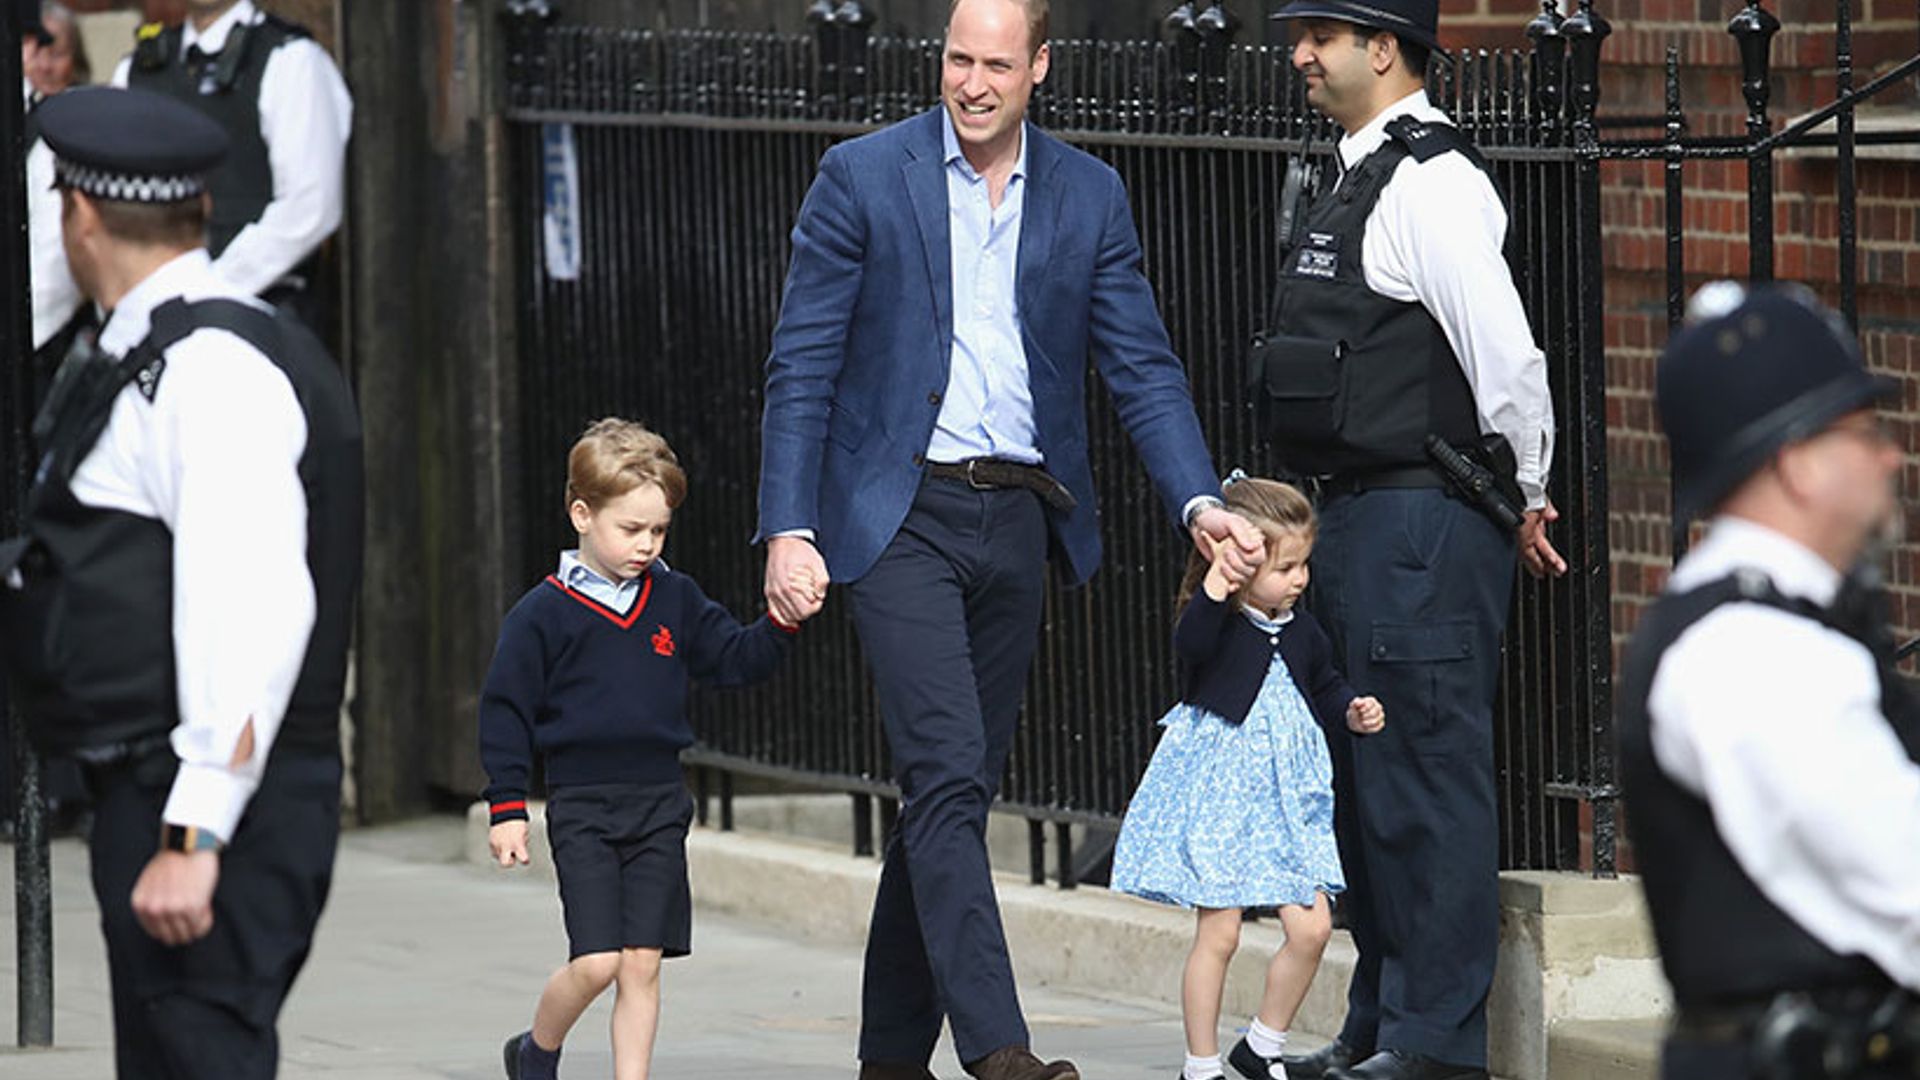 Prince George and Princess Charlotte arrive to meet their new baby brother